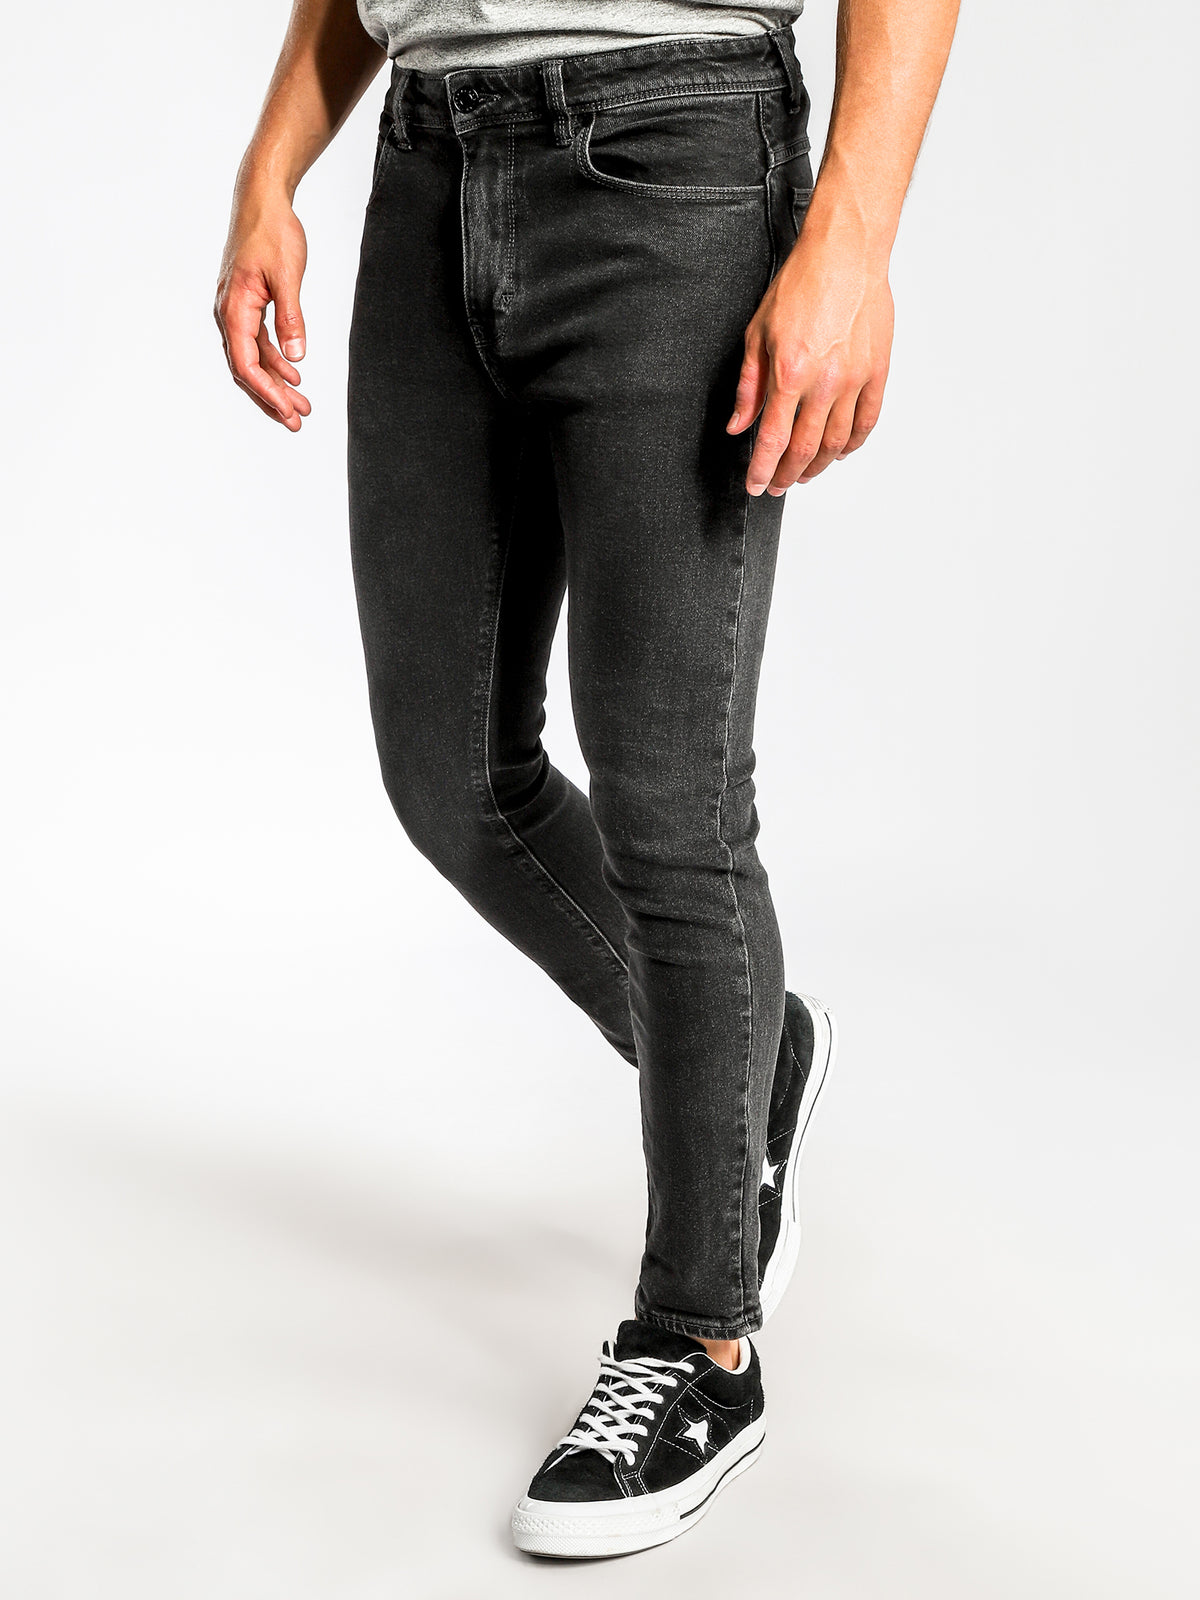 A Dropped Skinny Turn Up Jeans in Ghost Black Denim